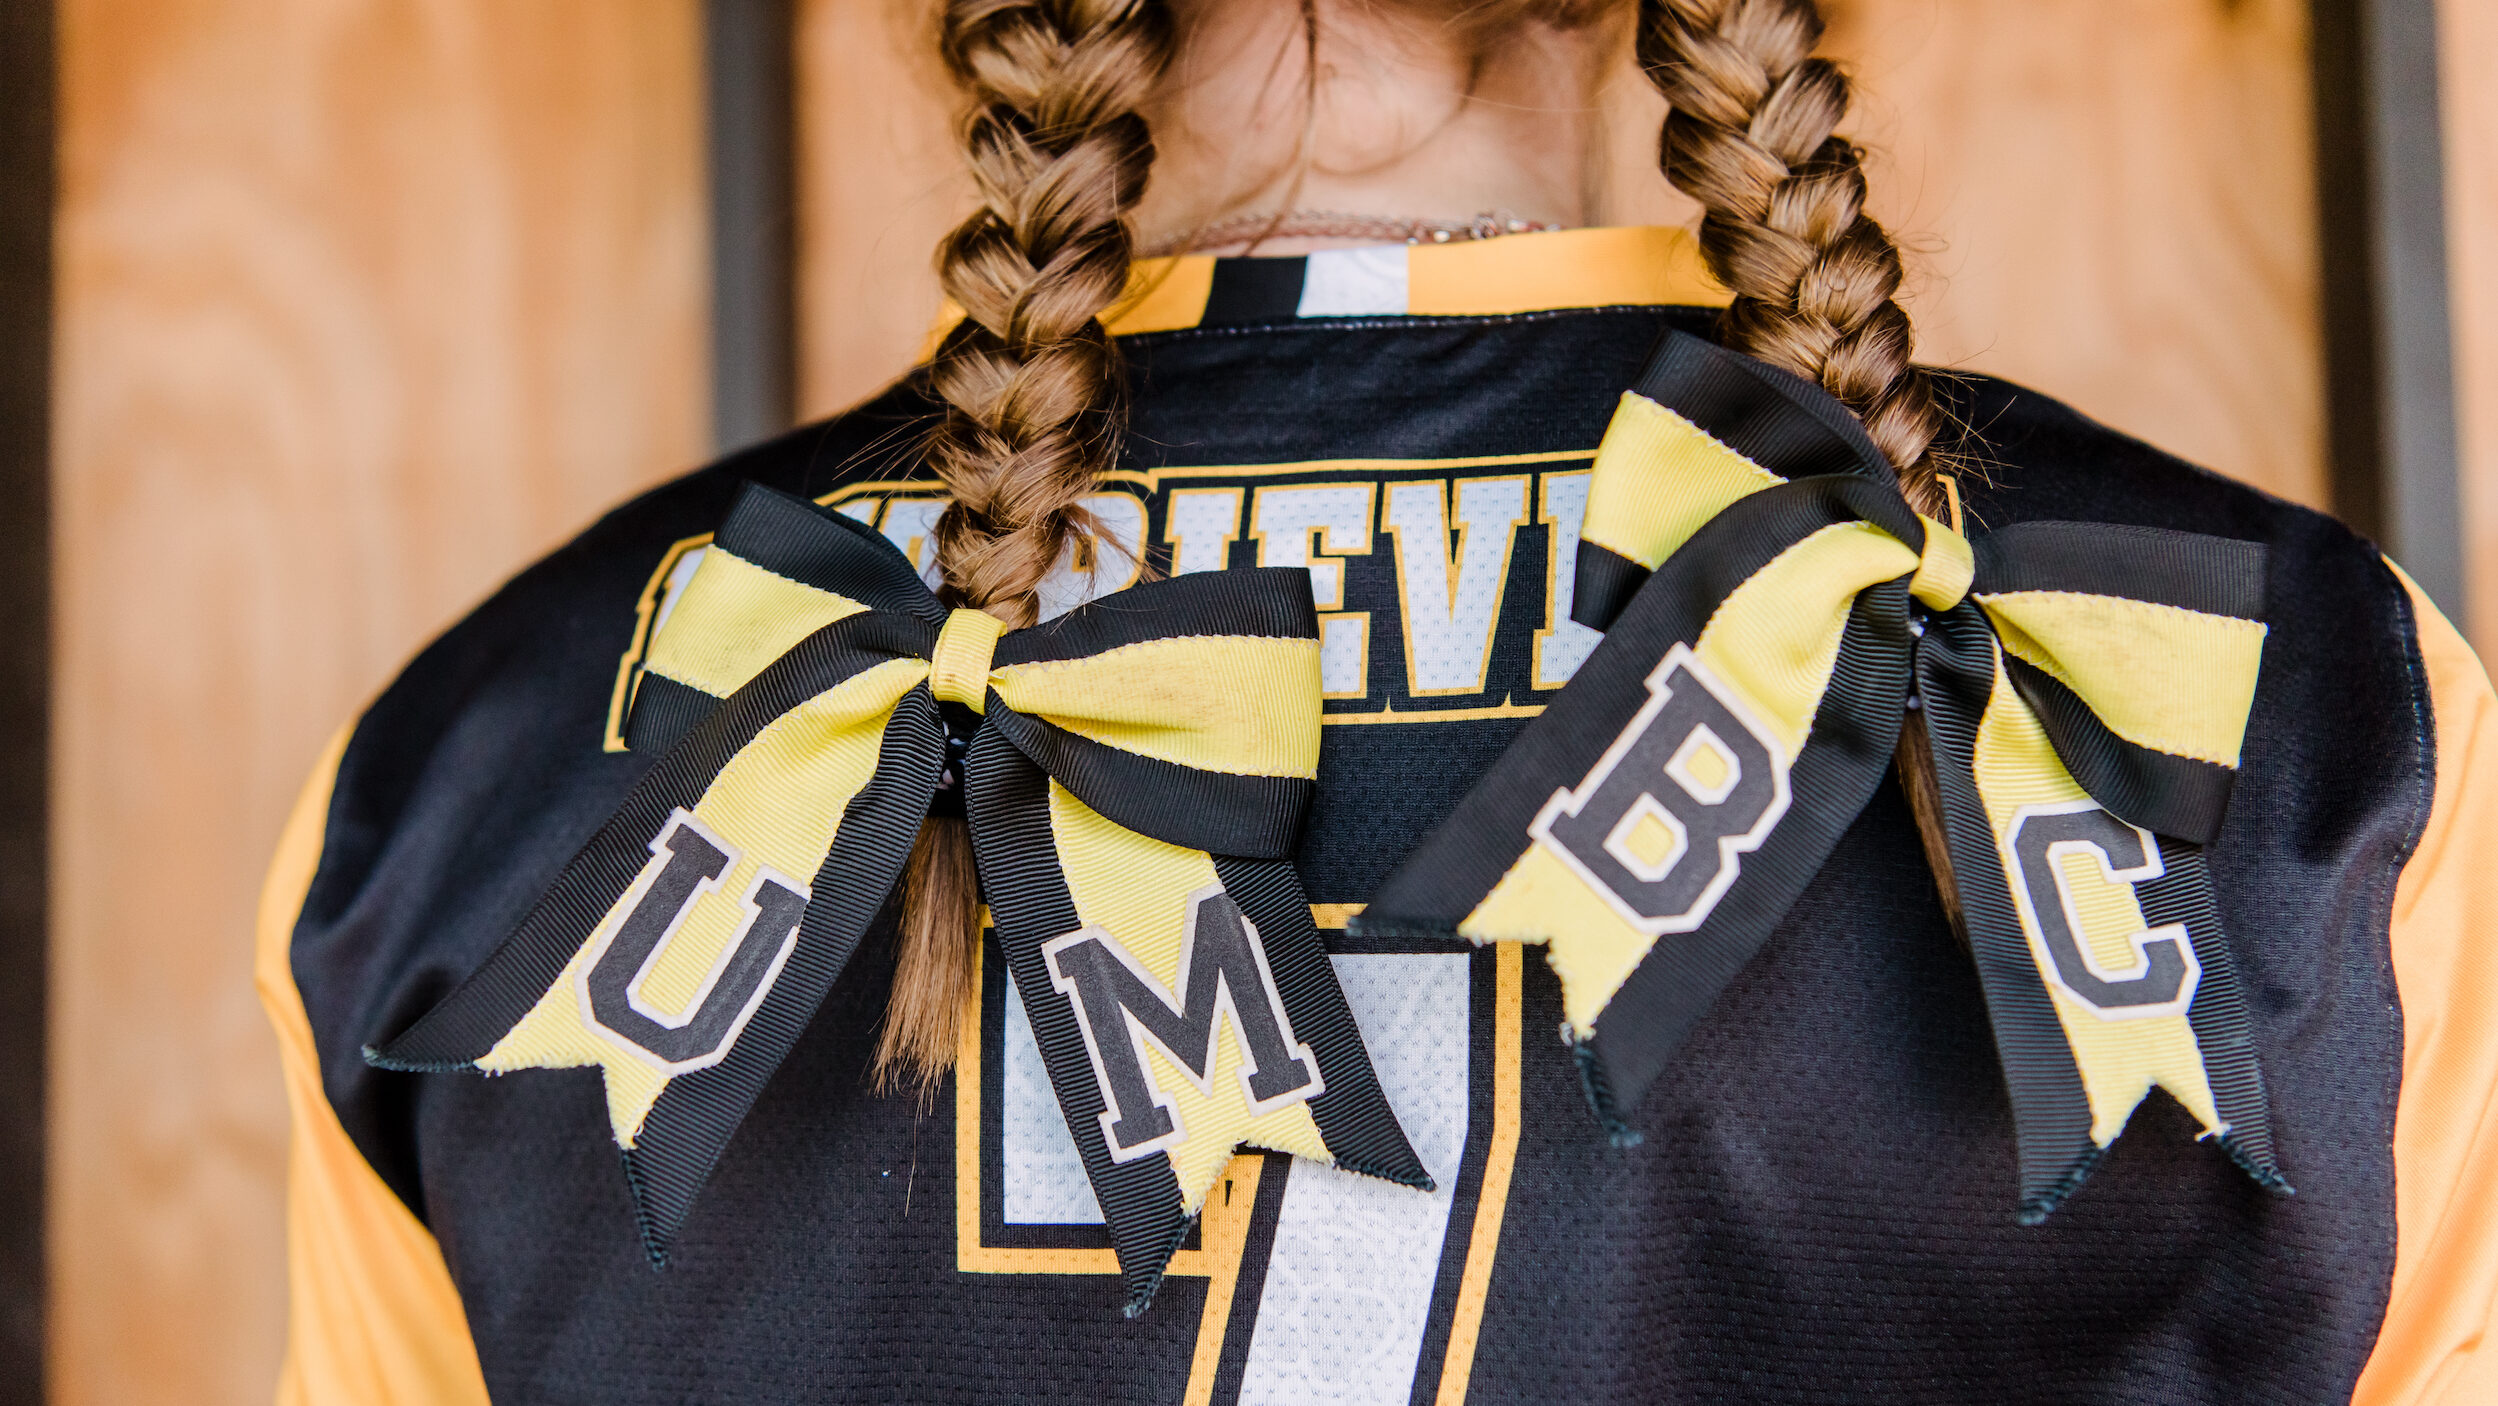 View of softball player's braided hair from behind with ribbons spelling "UMBC"